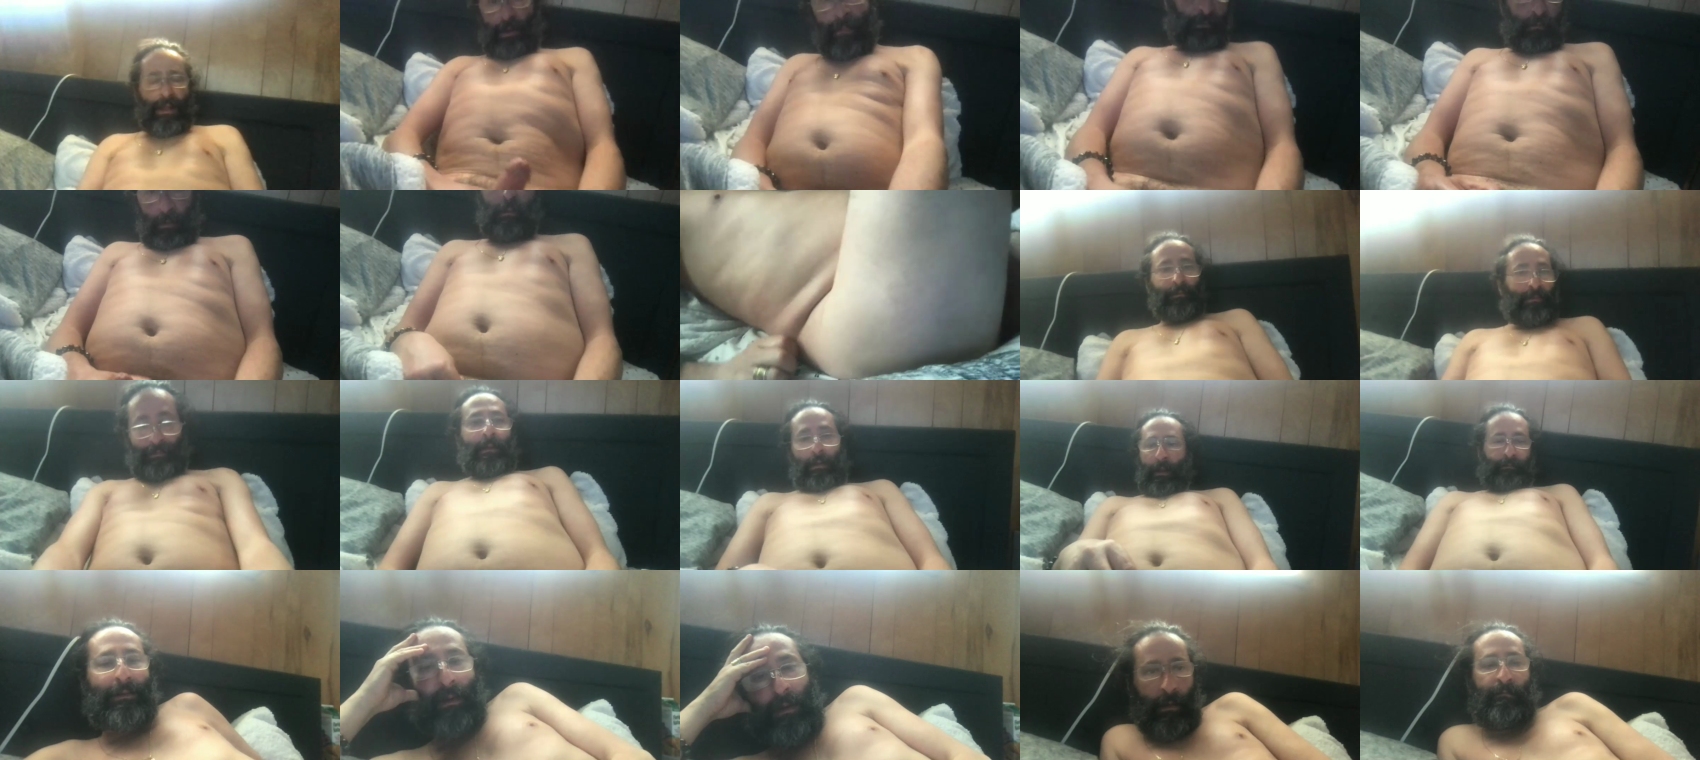 jacques2111  30-01-2022 Males naked